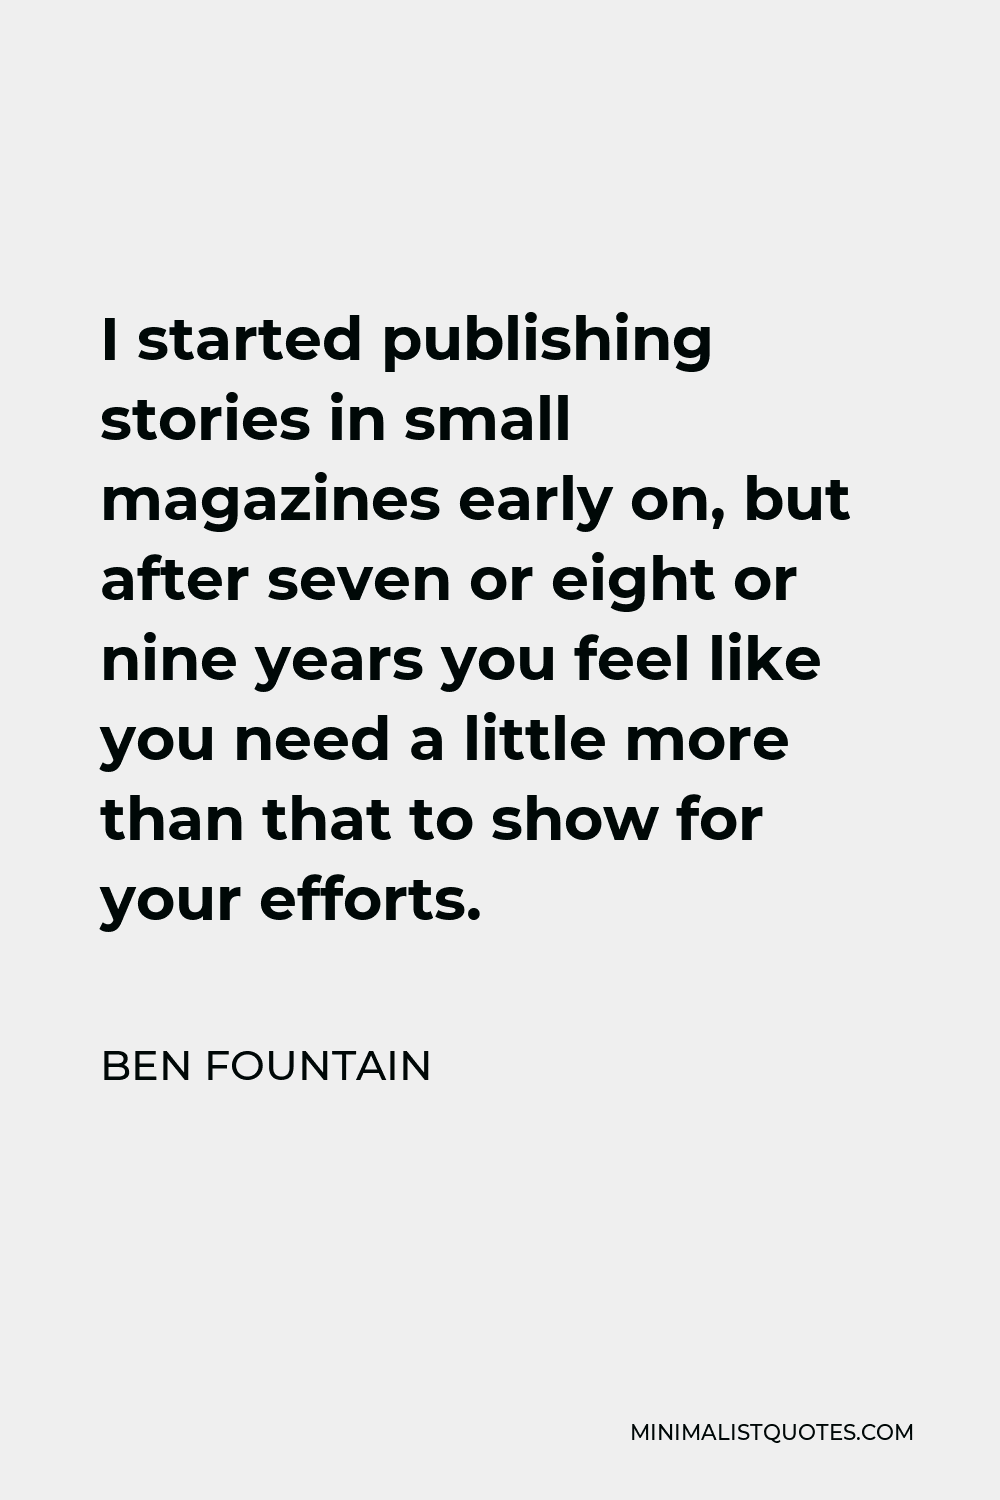 Ben Fountain Quote - I started publishing stories in small magazines early on, but after seven or eight or nine years you feel like you need a little more than that to show for your efforts.